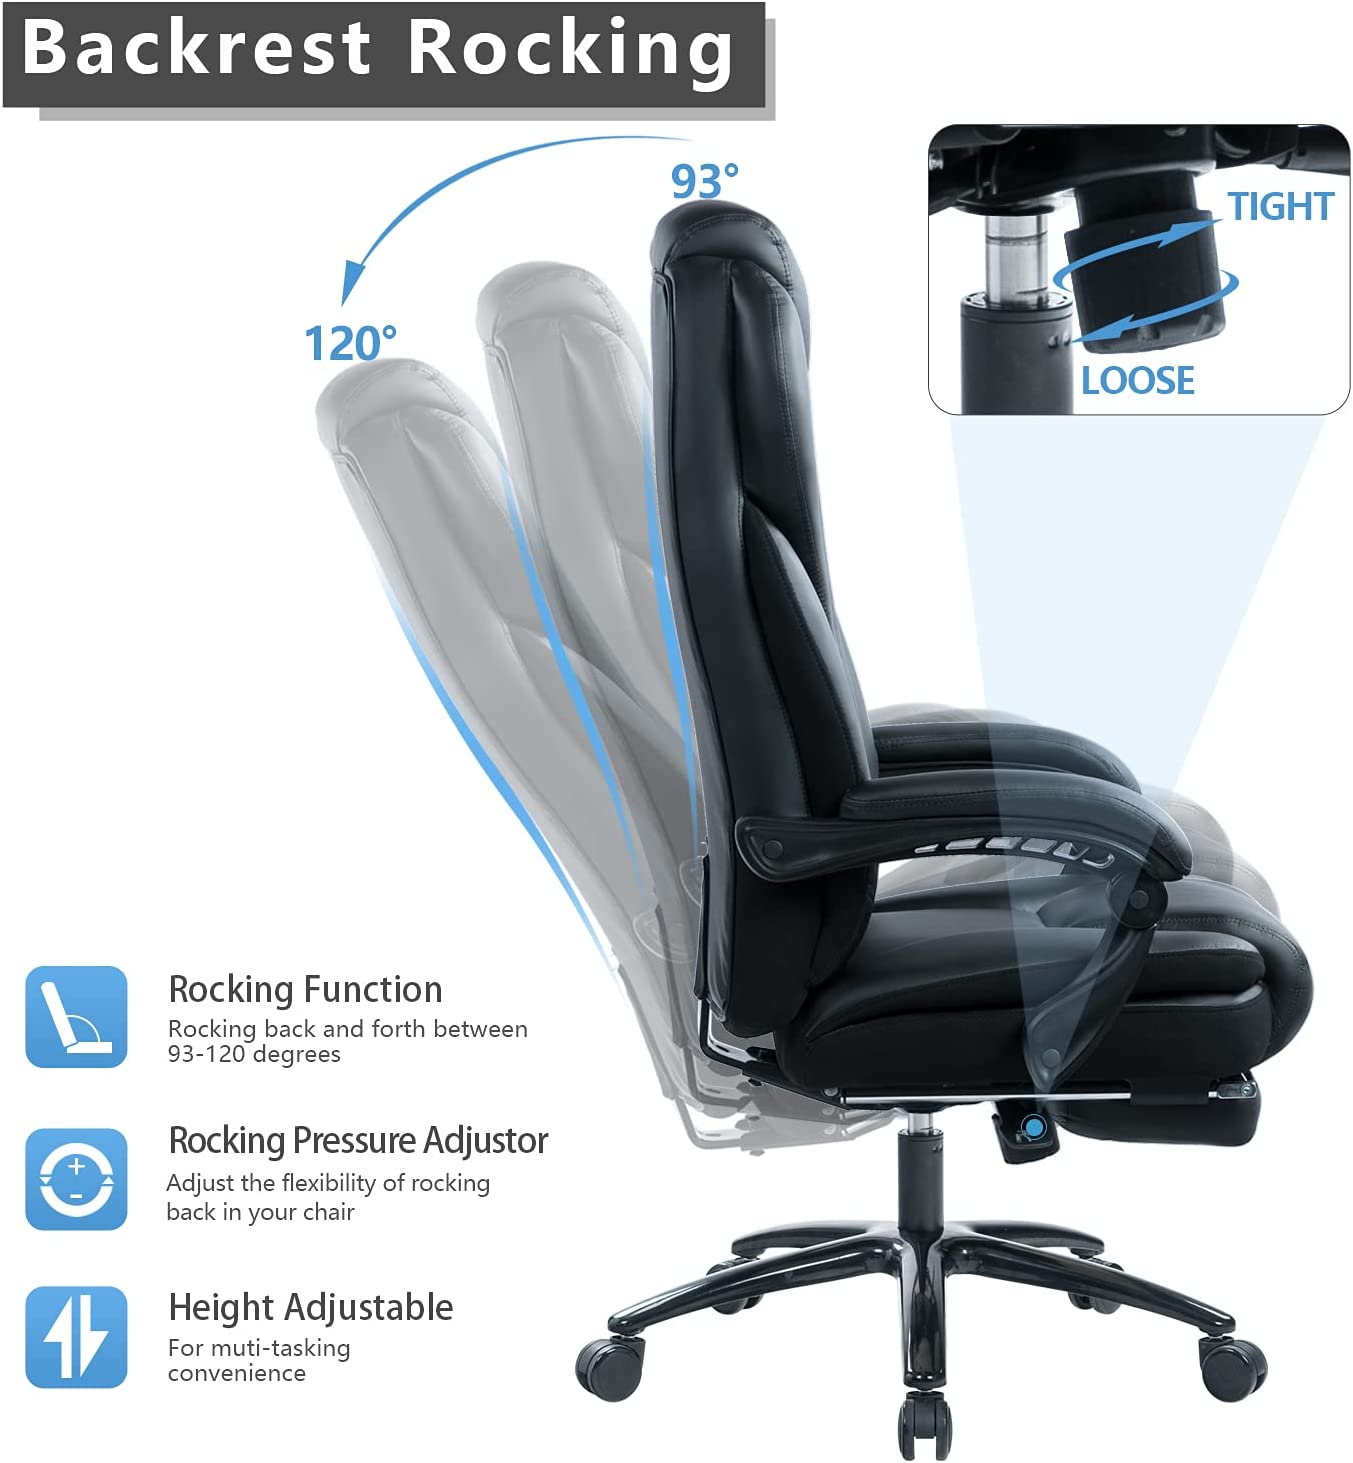 Arttoreal High Back Adjustable Executive Office Chair/Executive Recliner Chair, Black